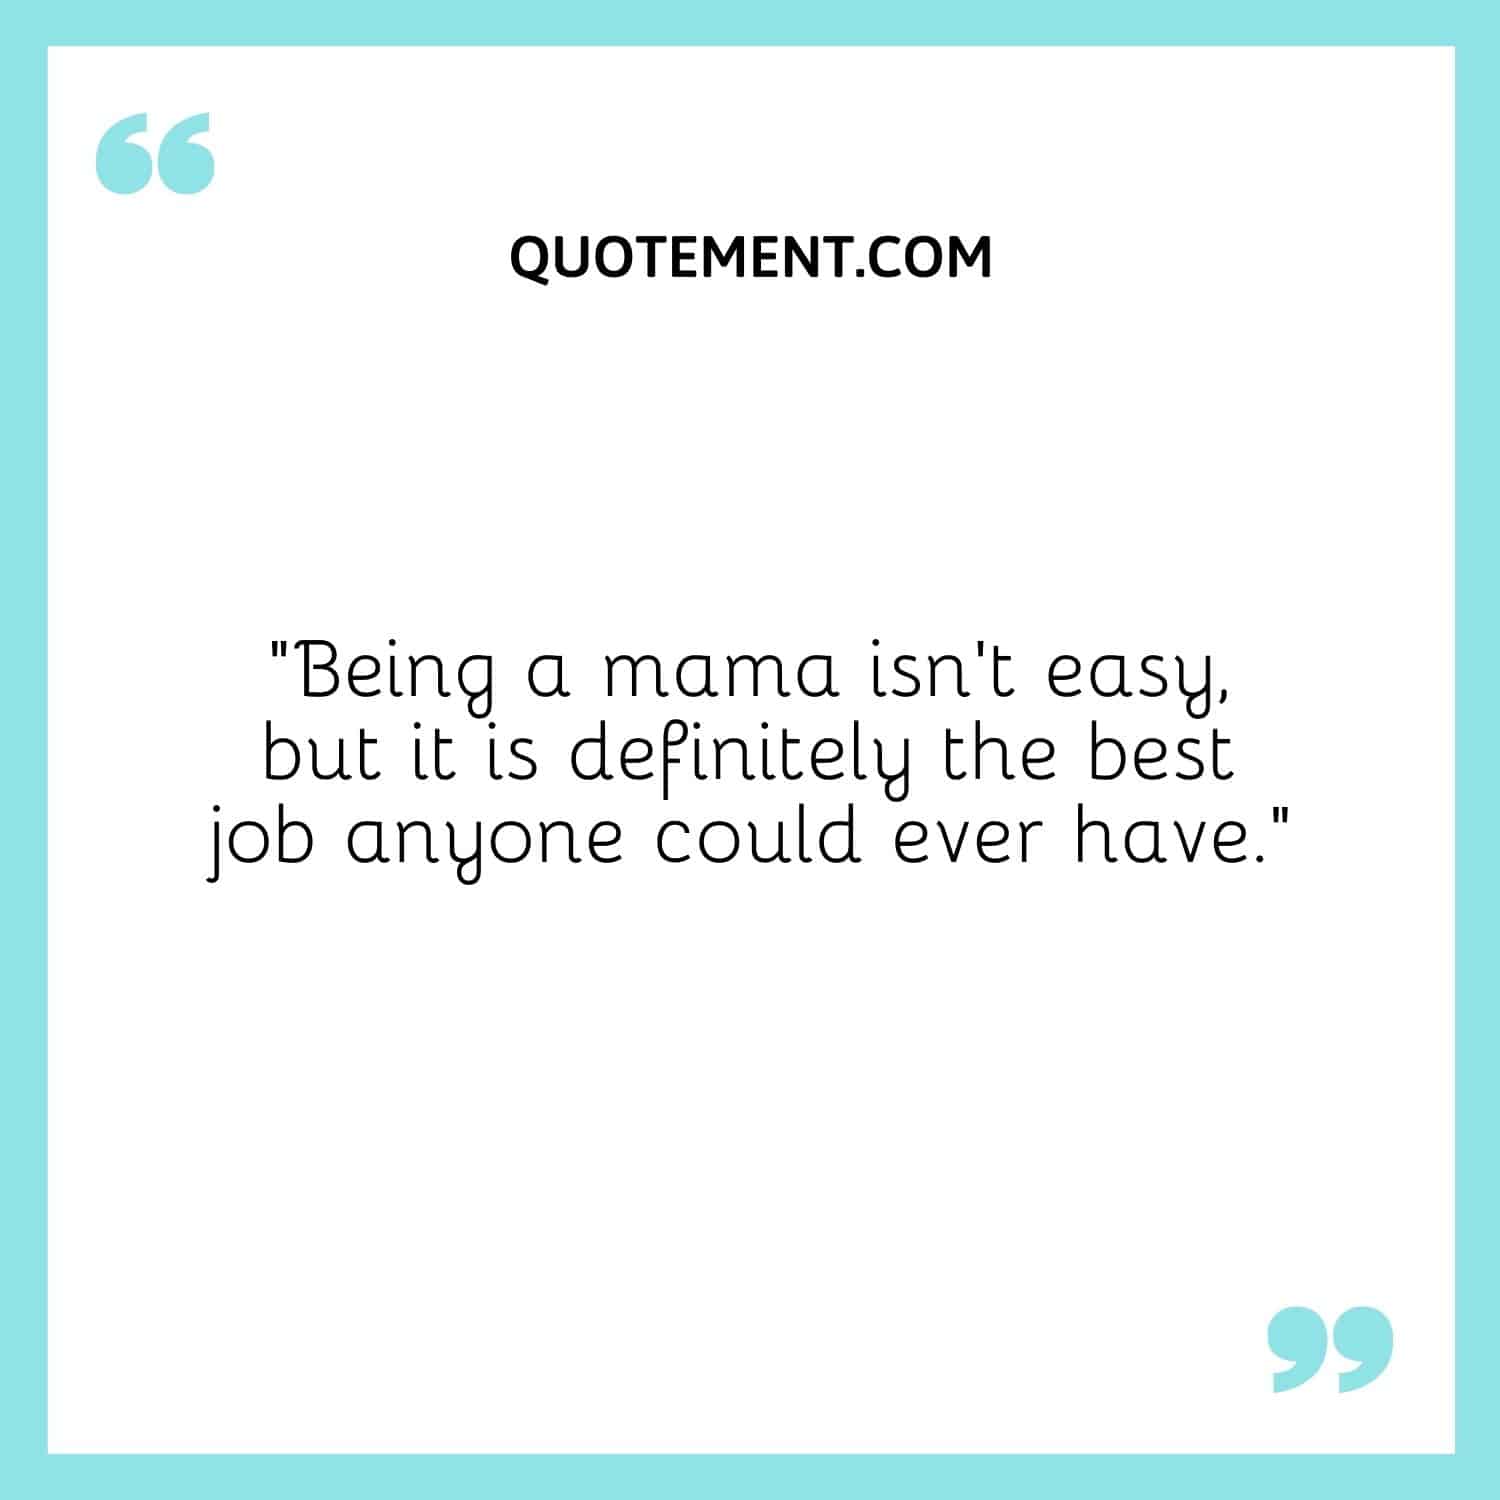 Being a mama isn’t easy, but it is definitely the best job anyone could ever have